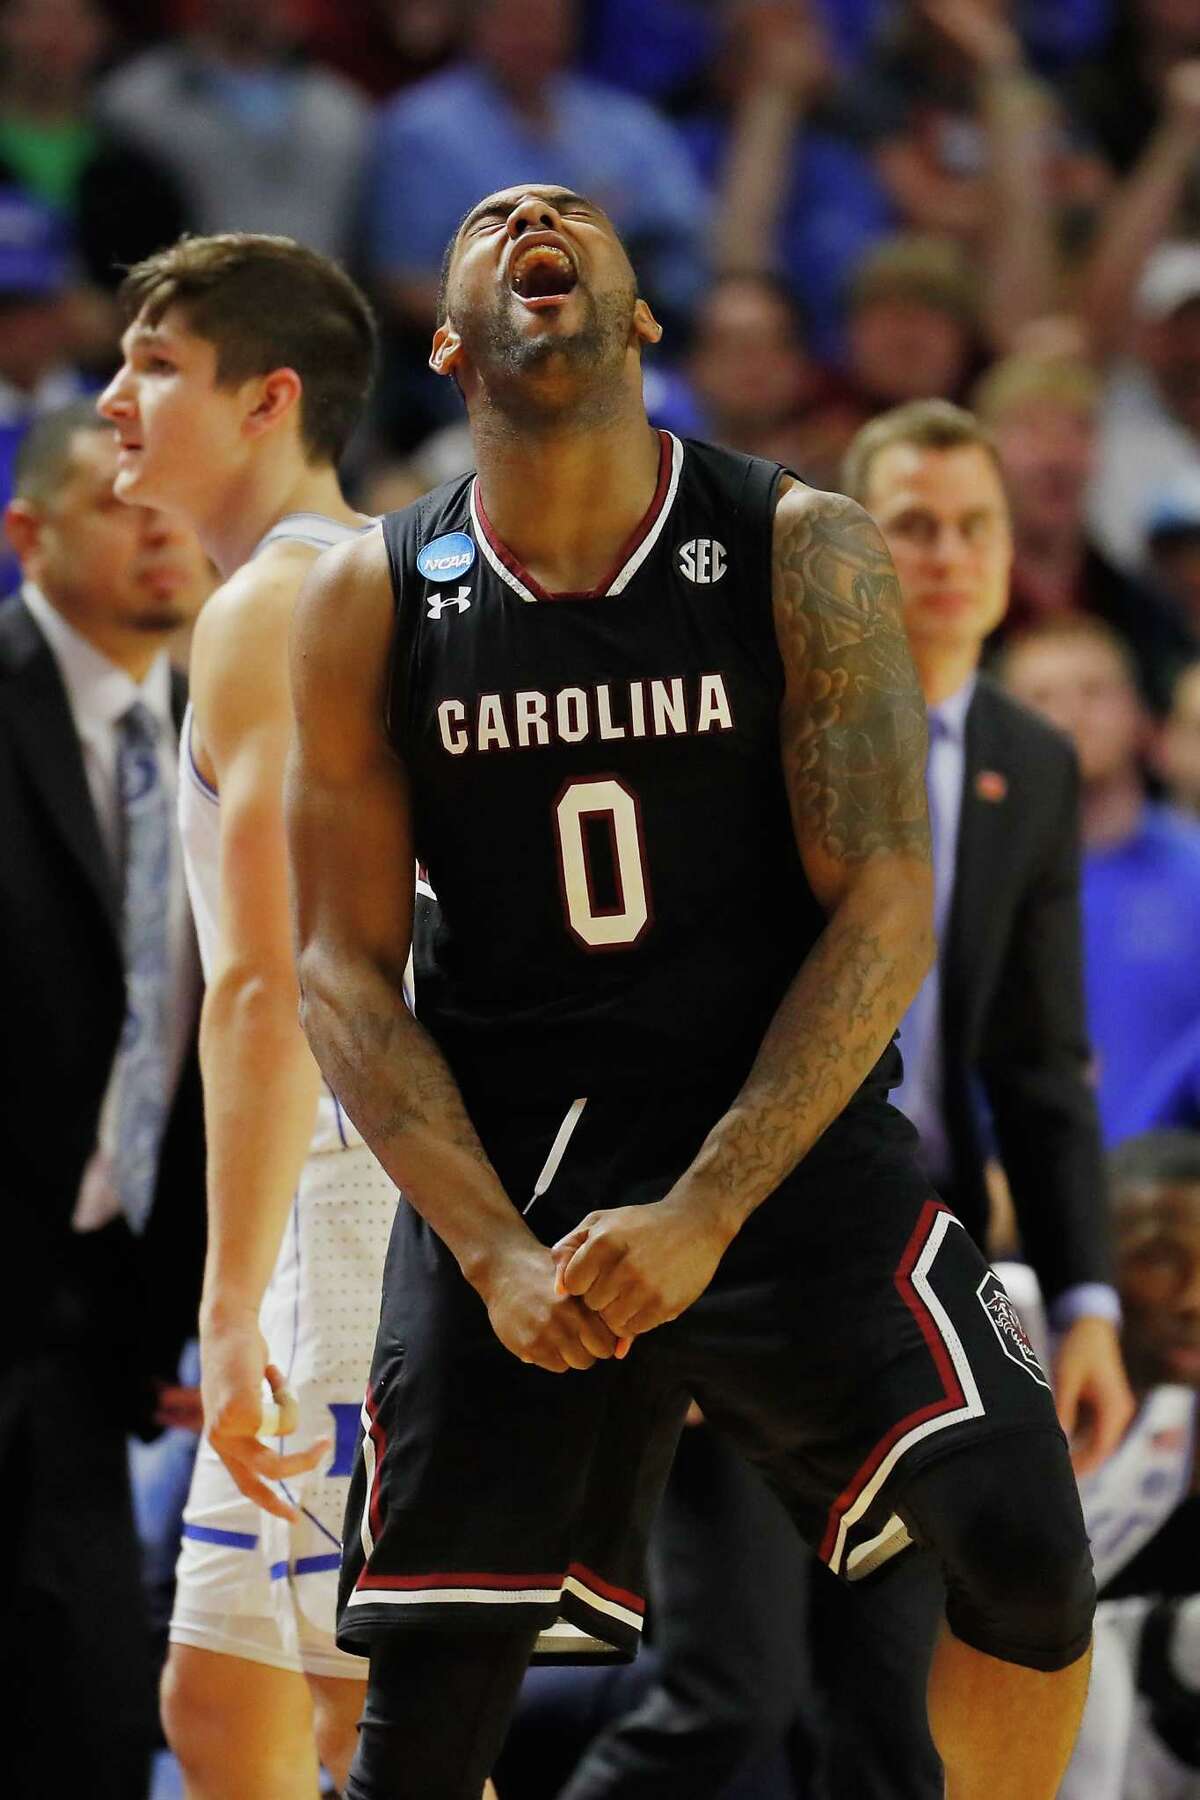 Sindarius Thornwell scored a game-high 24 points for South Carolina, which until this year hadn't won an NCAA Tournament game since 1973.